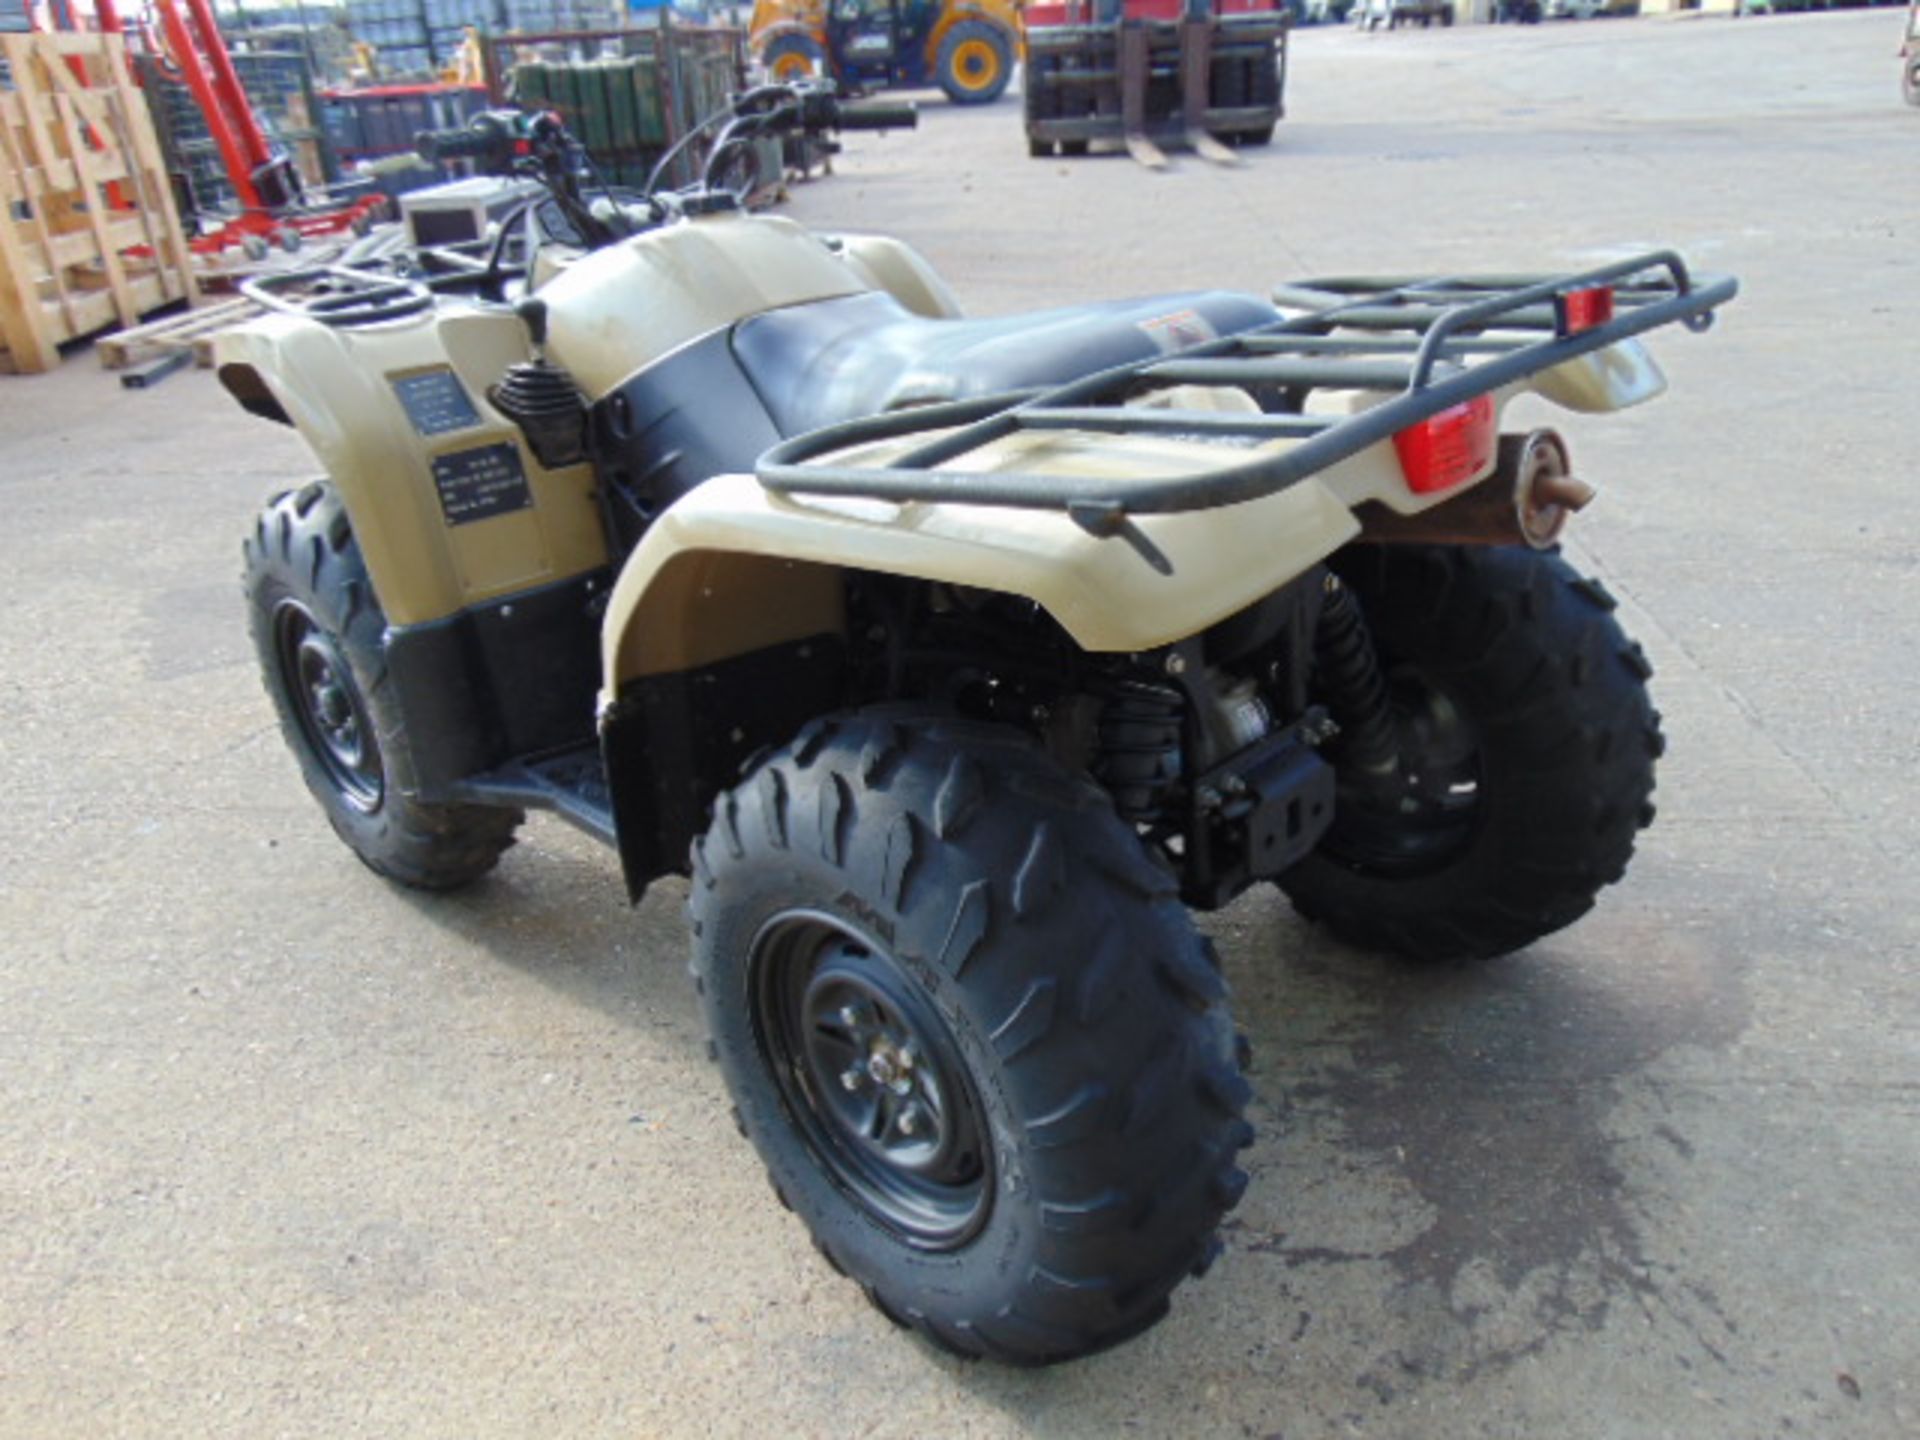 Military Specification Yamaha Grizzly 450 4 x 4 ATV Quad Bike Complete with Winch ONLY 130 HOURS! - Image 8 of 20